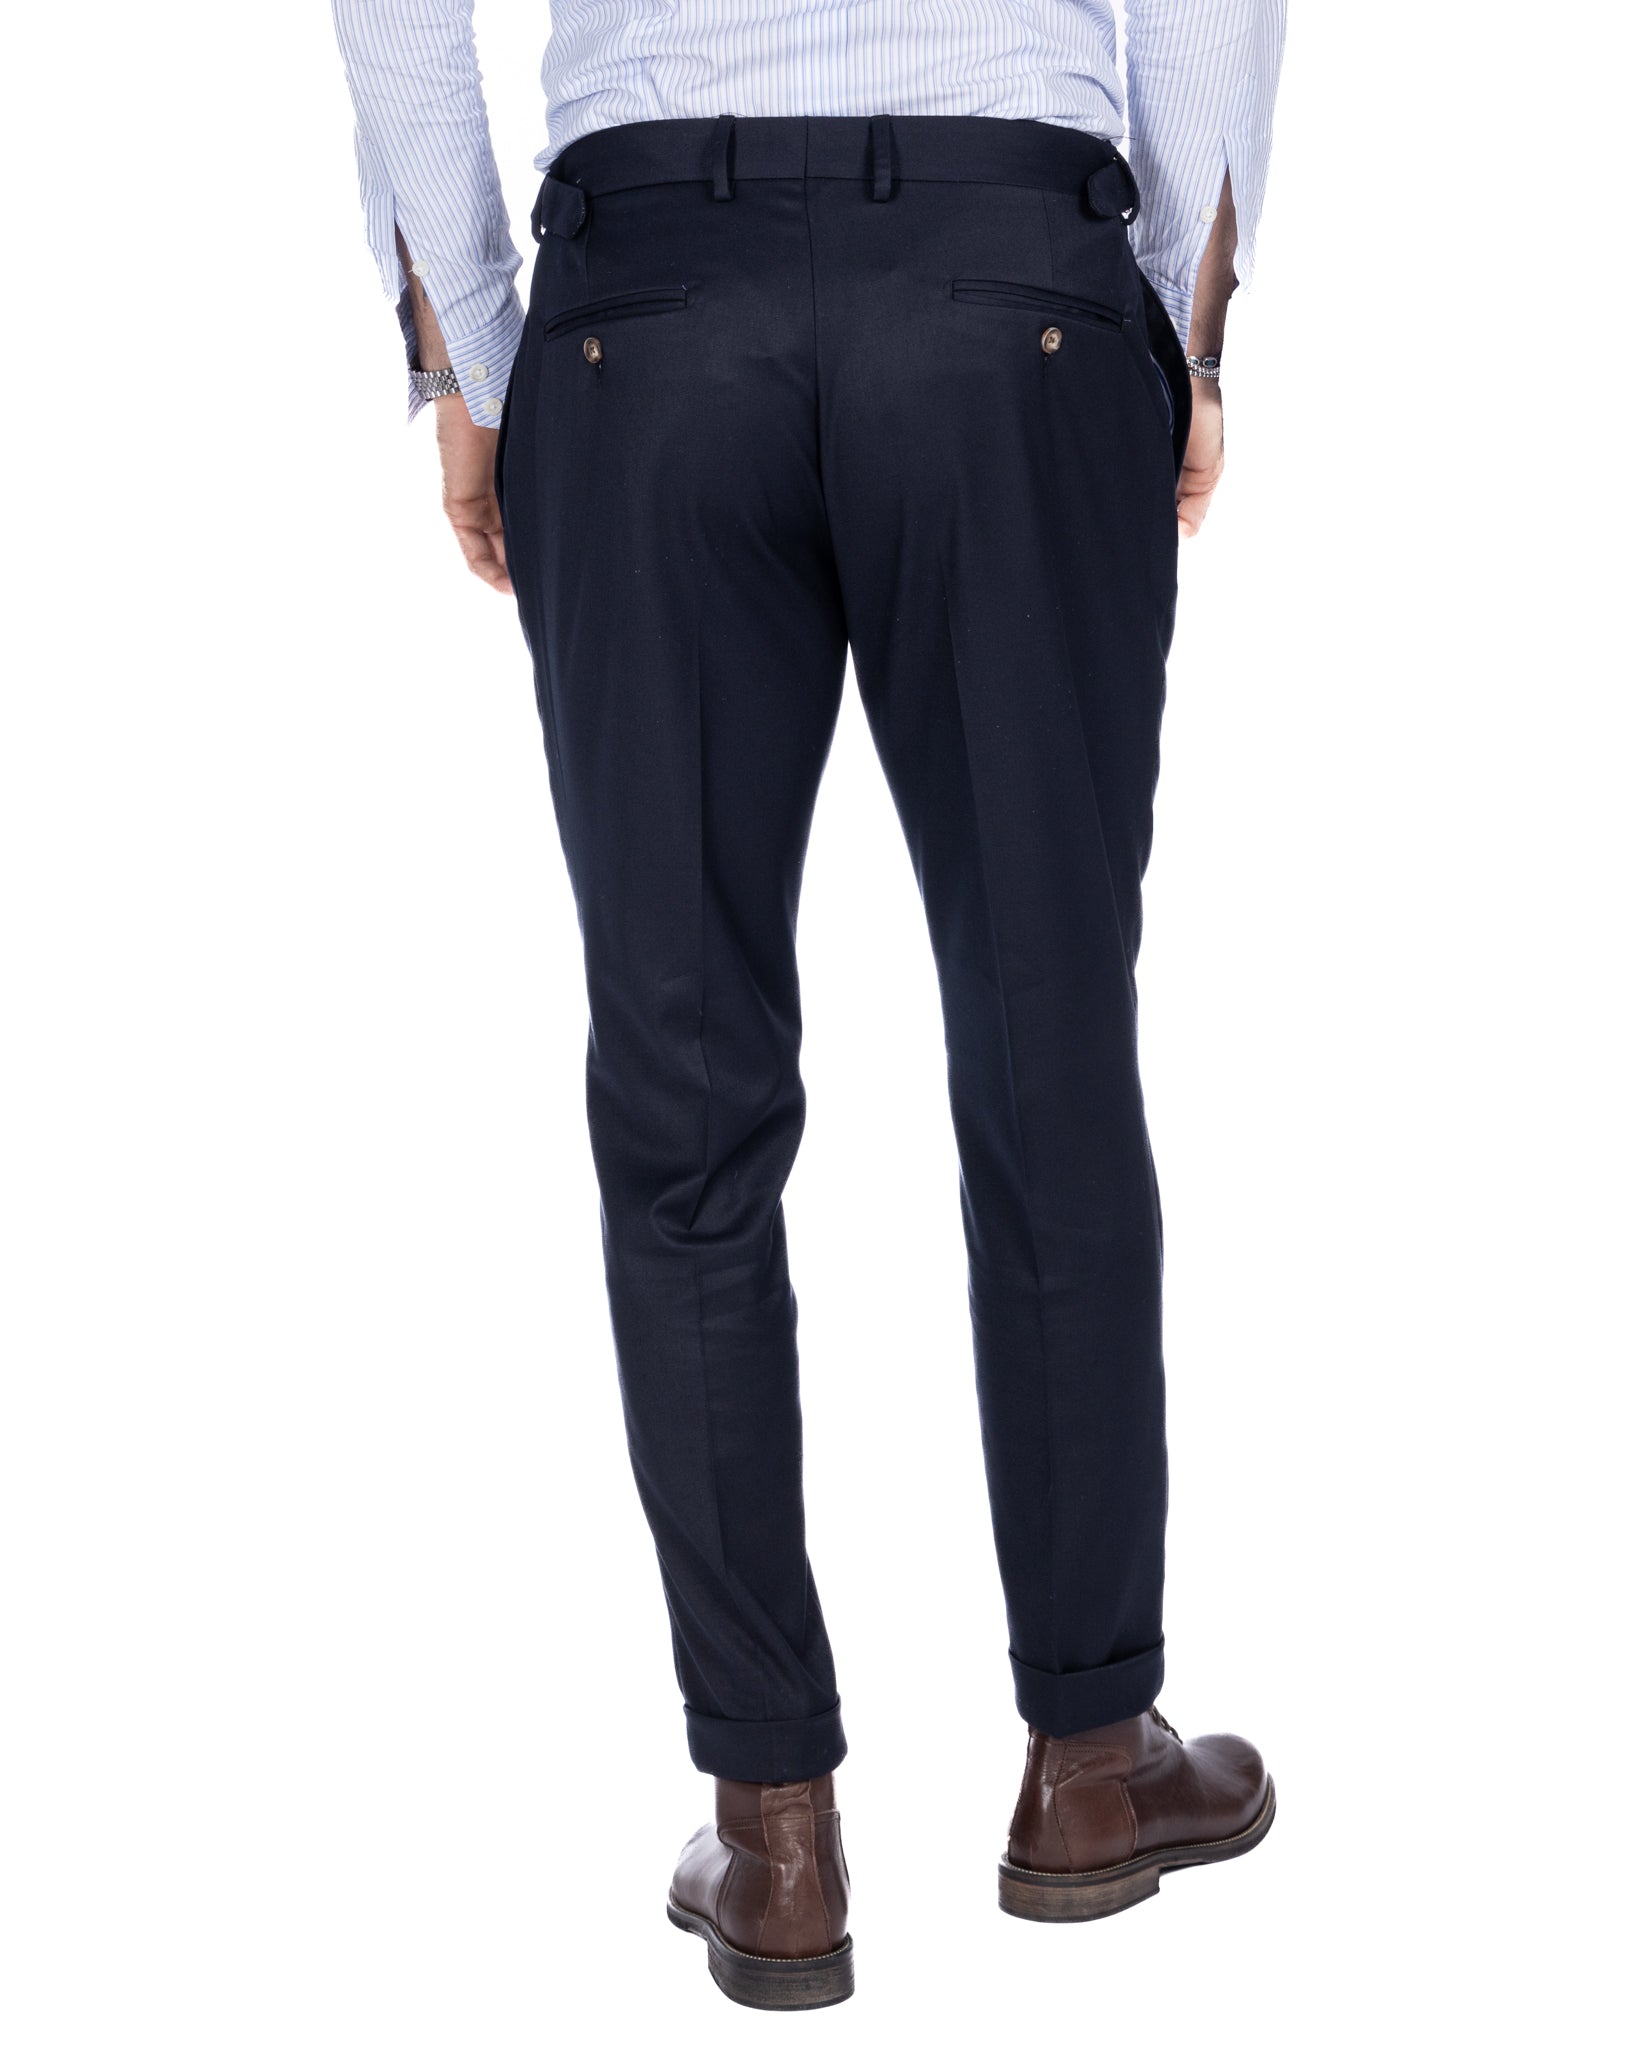 Monopoli - trousers with blue buckles